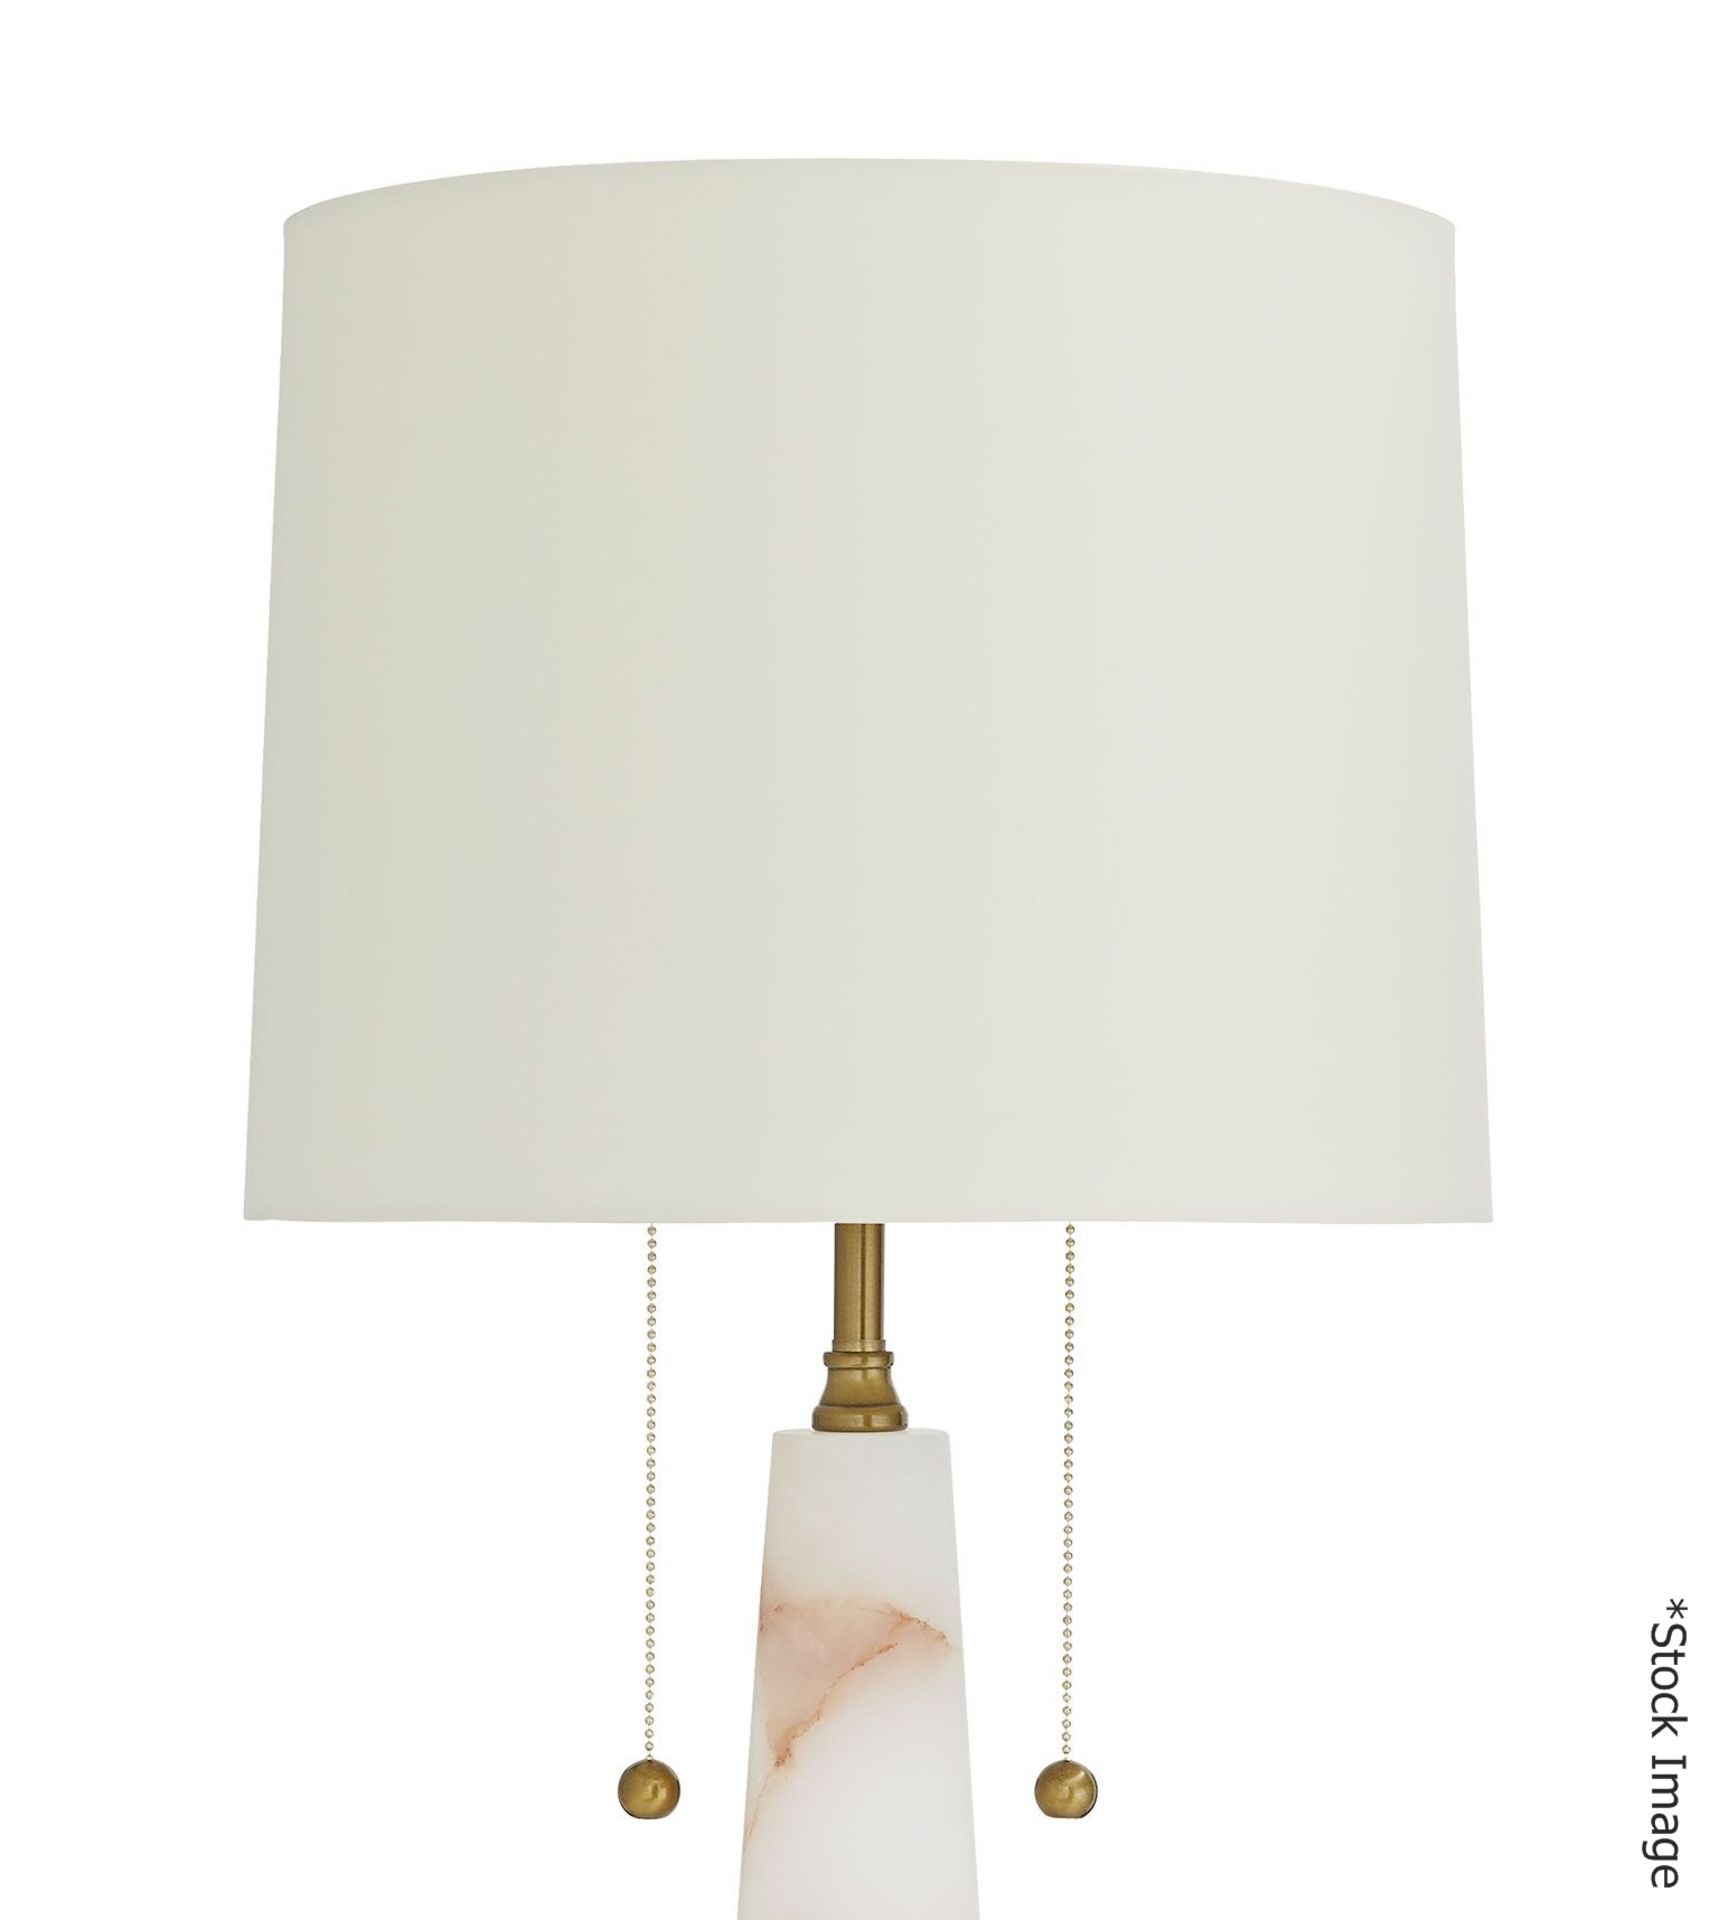 1 x ARTERIORS 'Tanner & Kenzie' Designer Putty Colored Fabric Shade With Cream Cotton Lining - Boxed